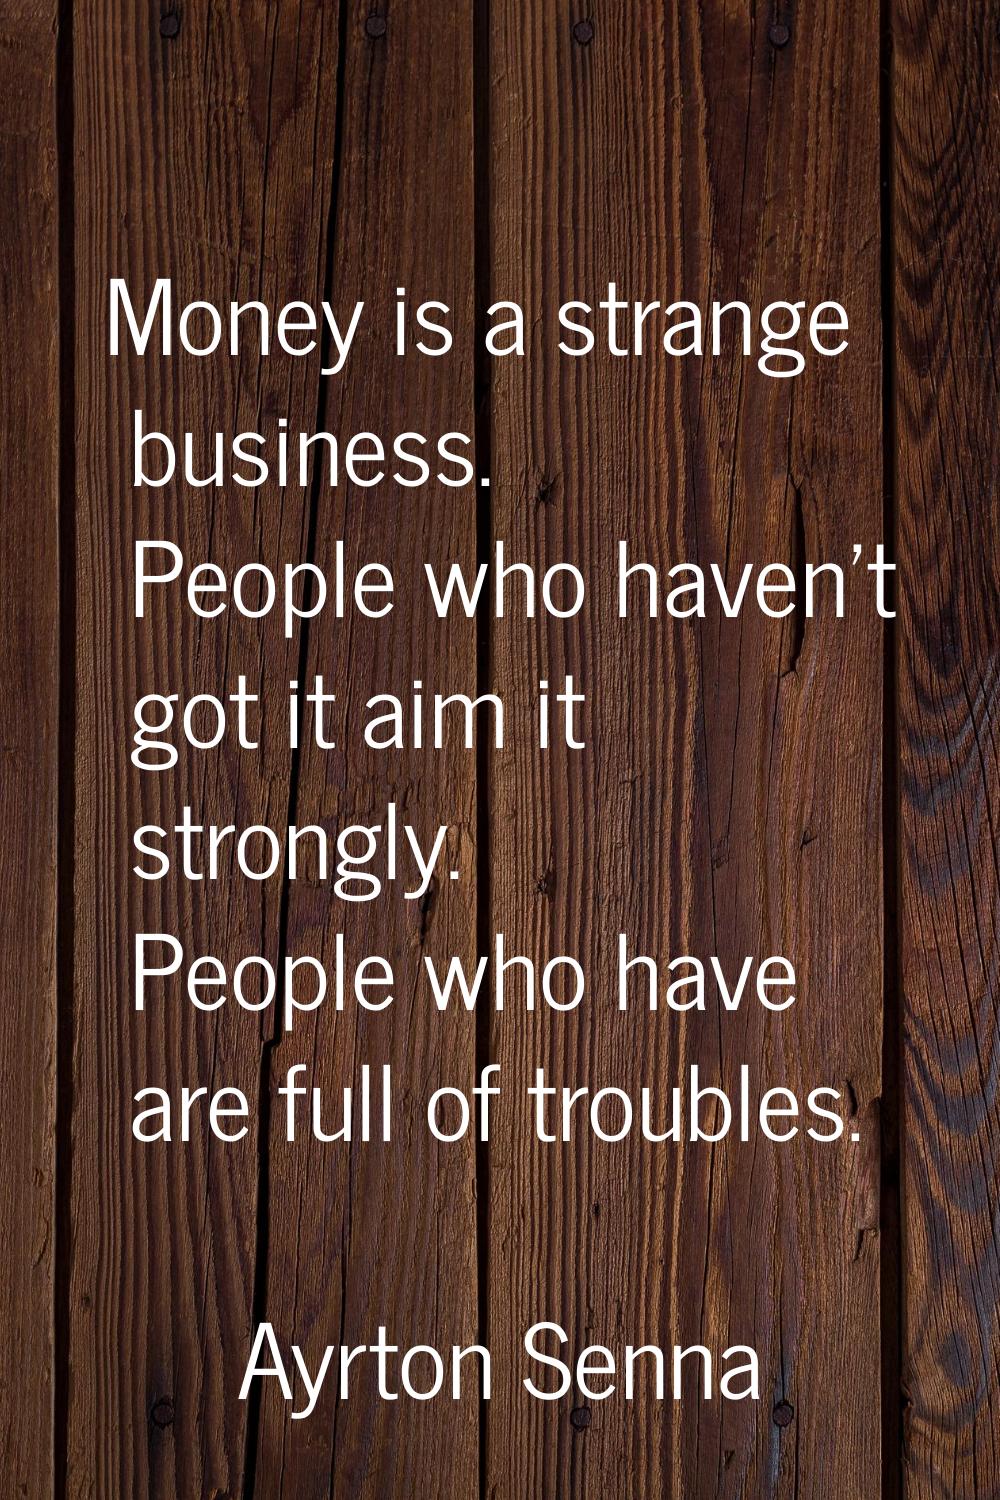 Money is a strange business. People who haven't got it aim it strongly. People who have are full of